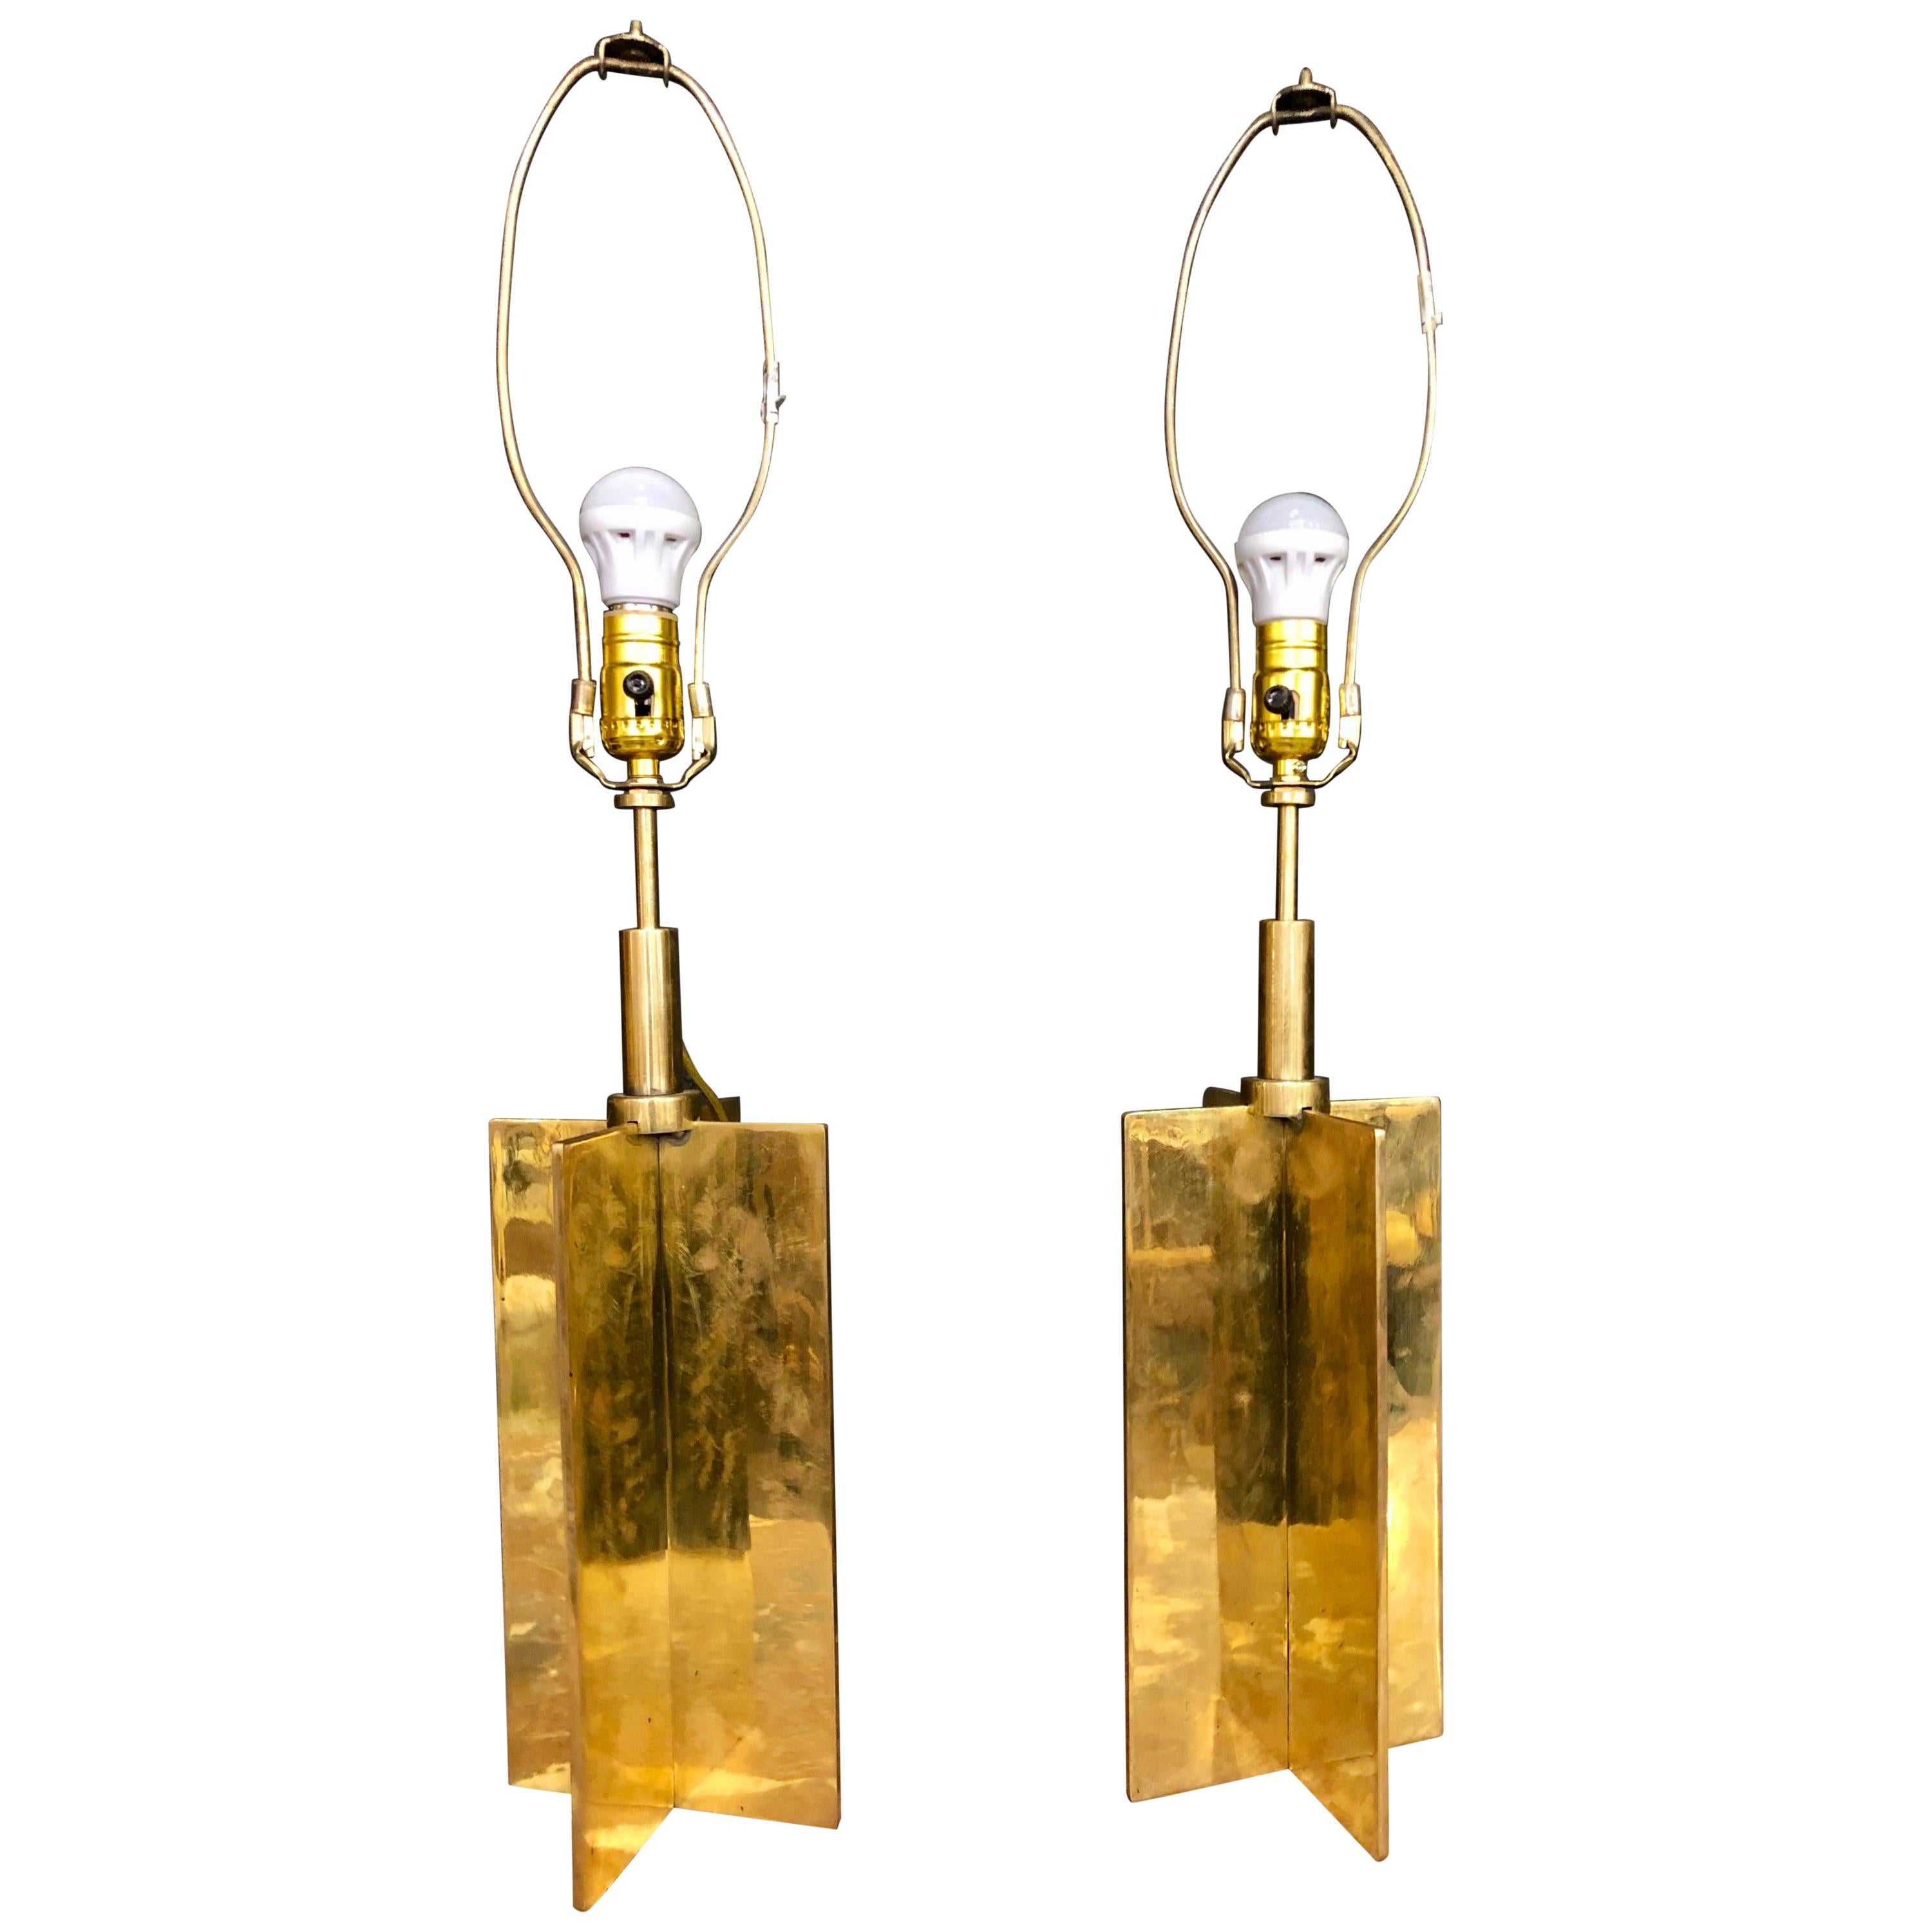 Pair of Custom Croisillion Lamps in The Jean Michel Frank Manner